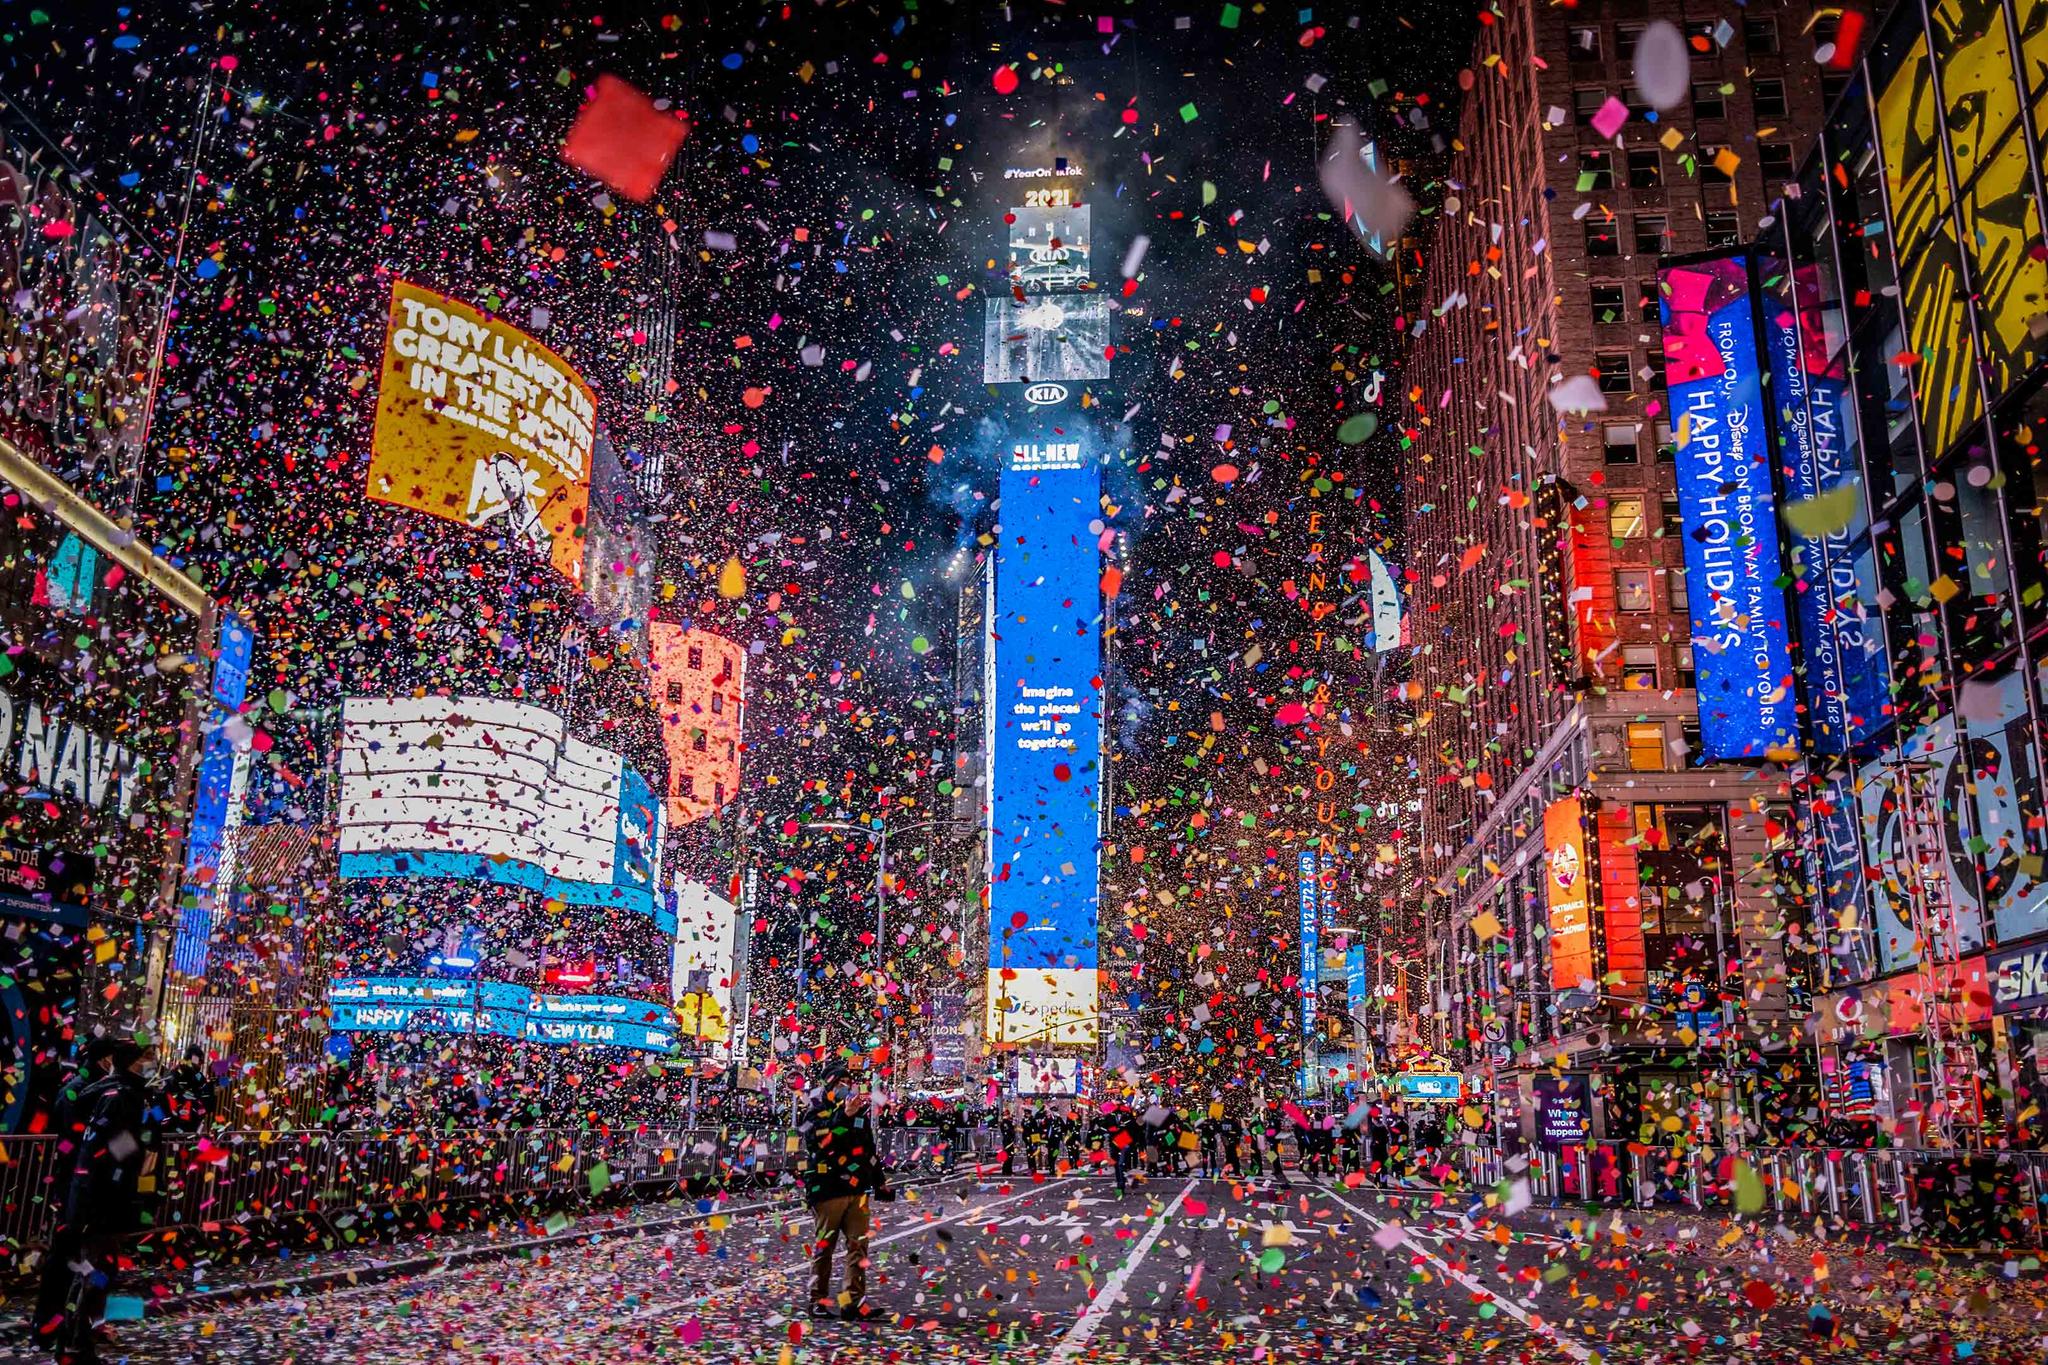 Confetti flies after the Times Square New Year's Eve Ball drops in a nearly empty Times Square due to COVID-19 lockdown, early Friday, Jan. 1, 2021.